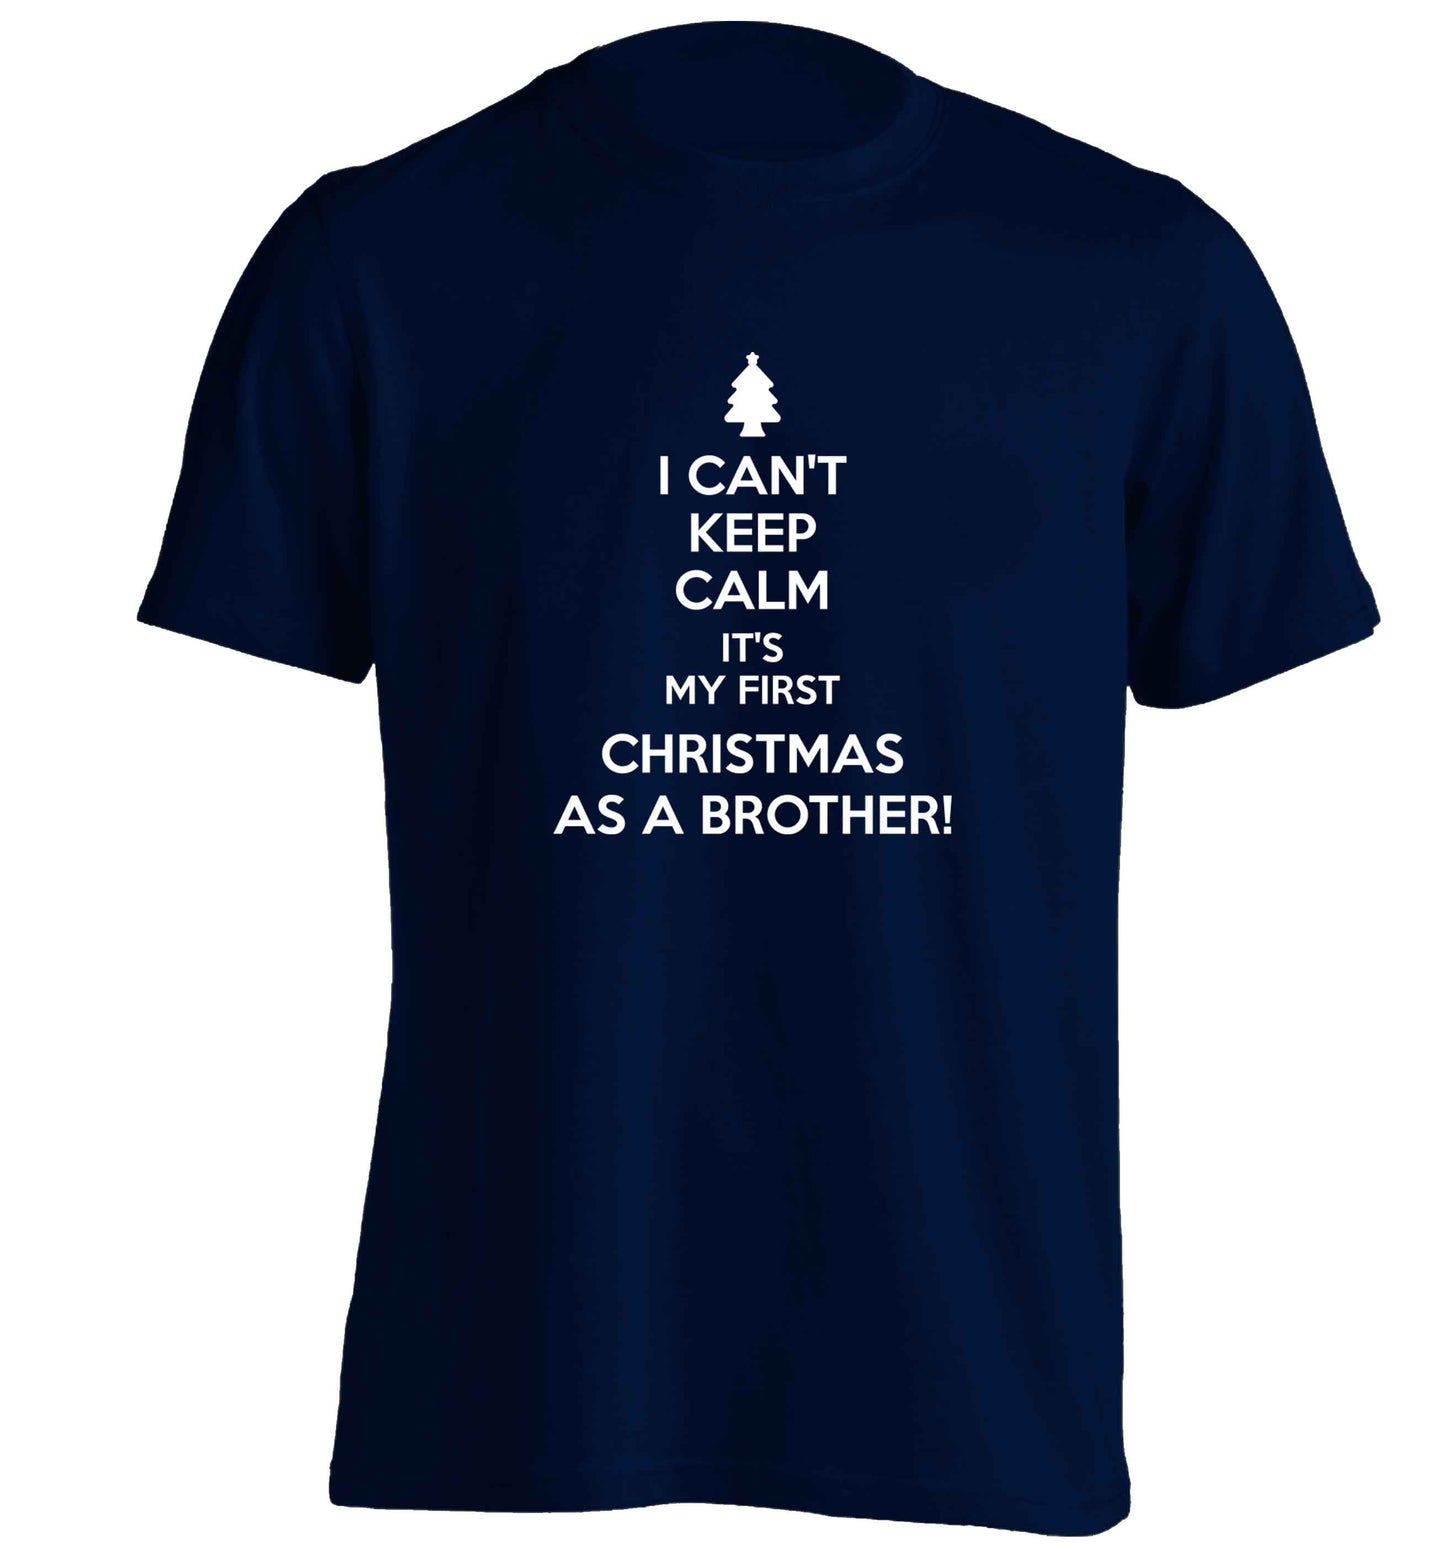 I can't keep calm it's my first Christmas as a brother! adults unisex navy Tshirt 2XL